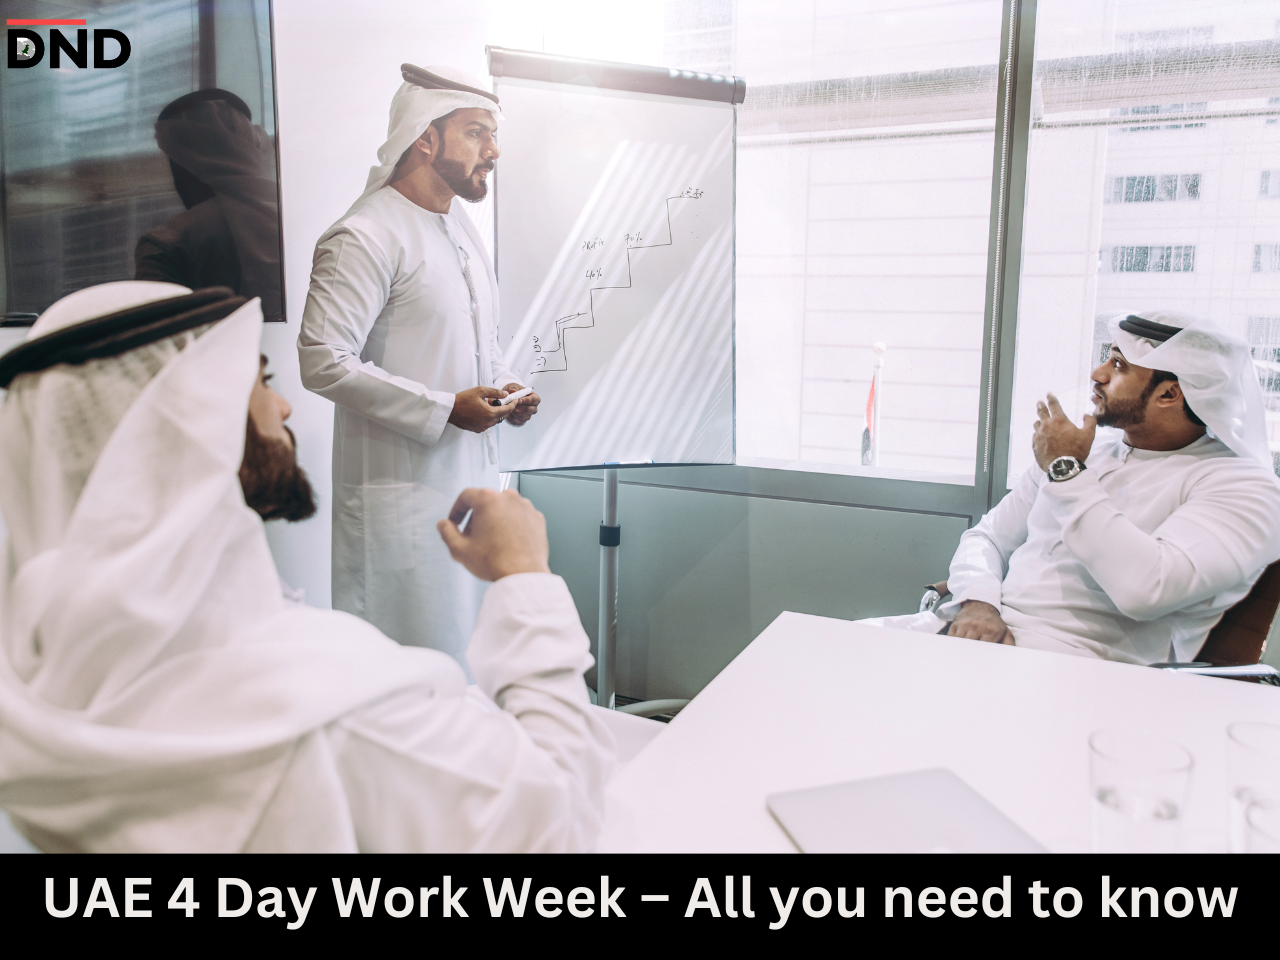 UAE 4 Day Work Week - All you need to know